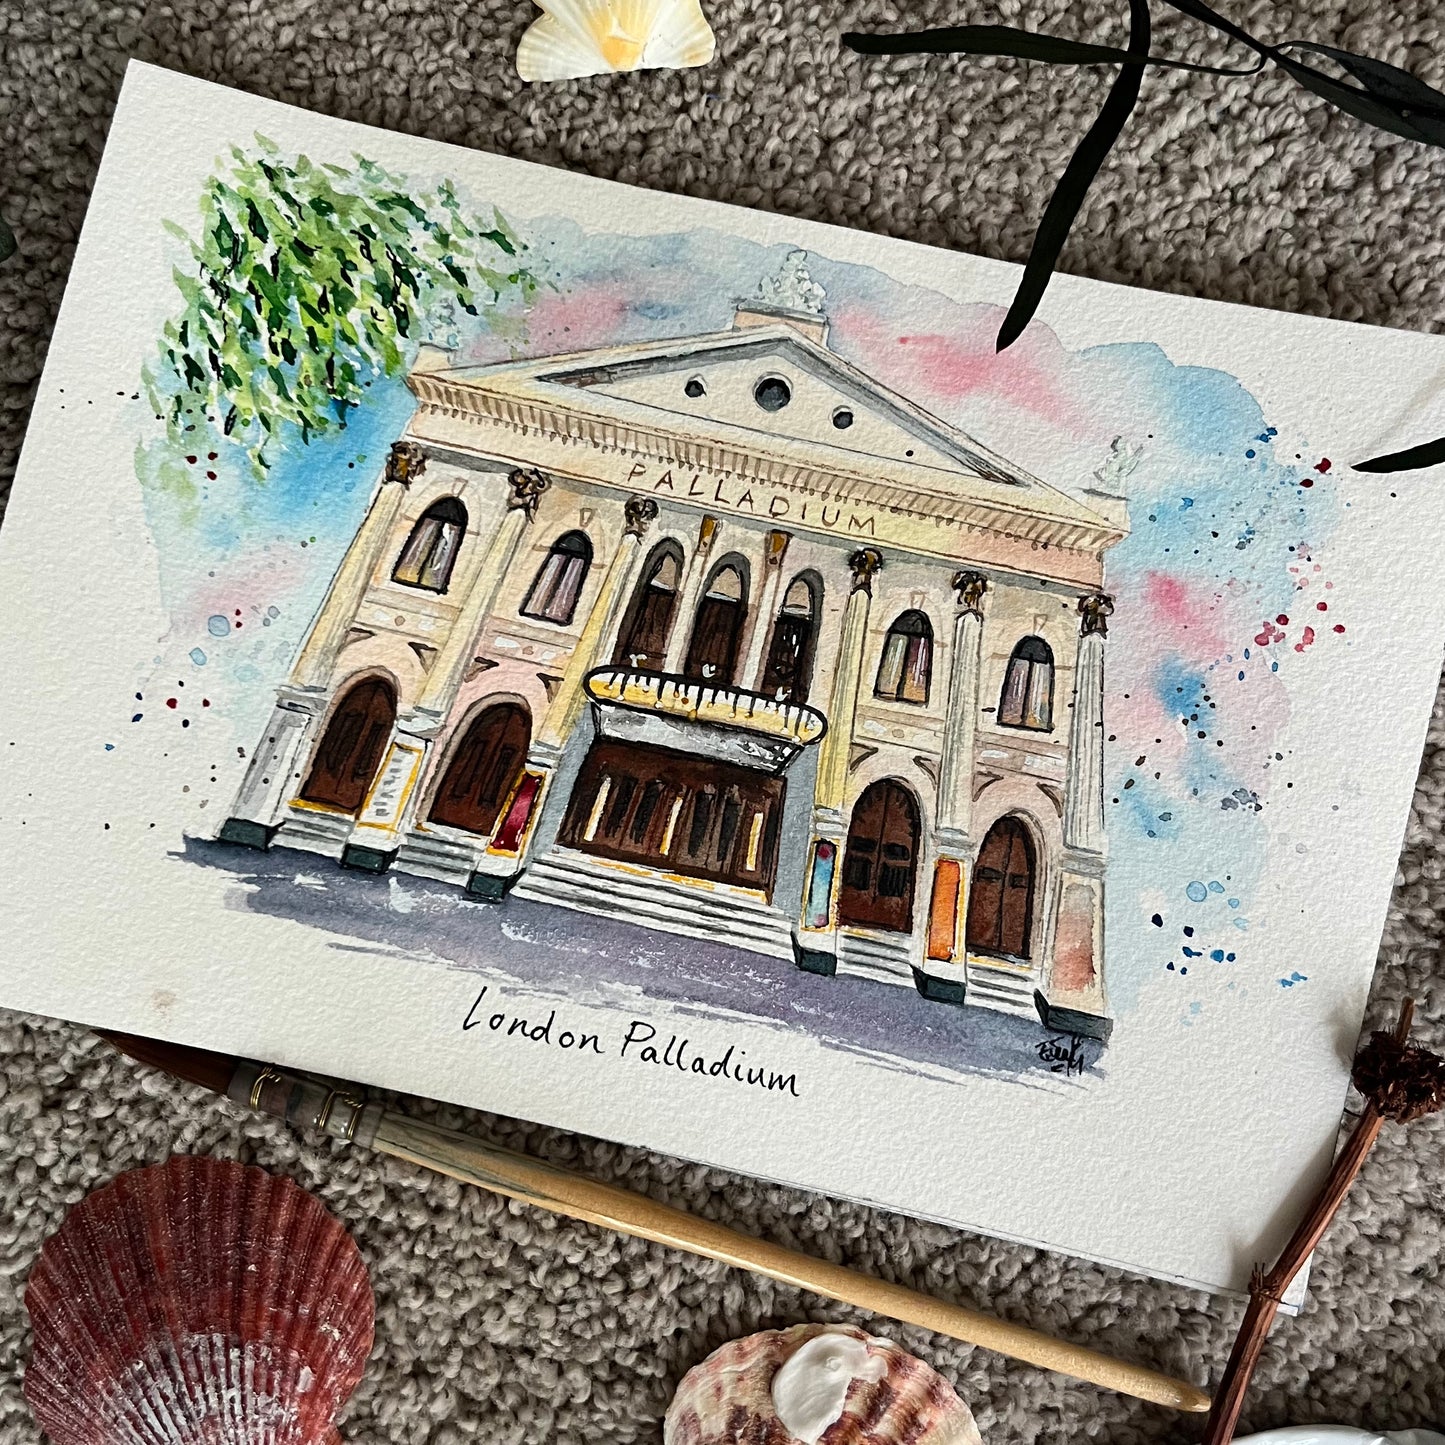 This watercolour painting features an illustration of the London Palladium in London's West End. Painted by local artist and performer, Eve Leoni Smith.